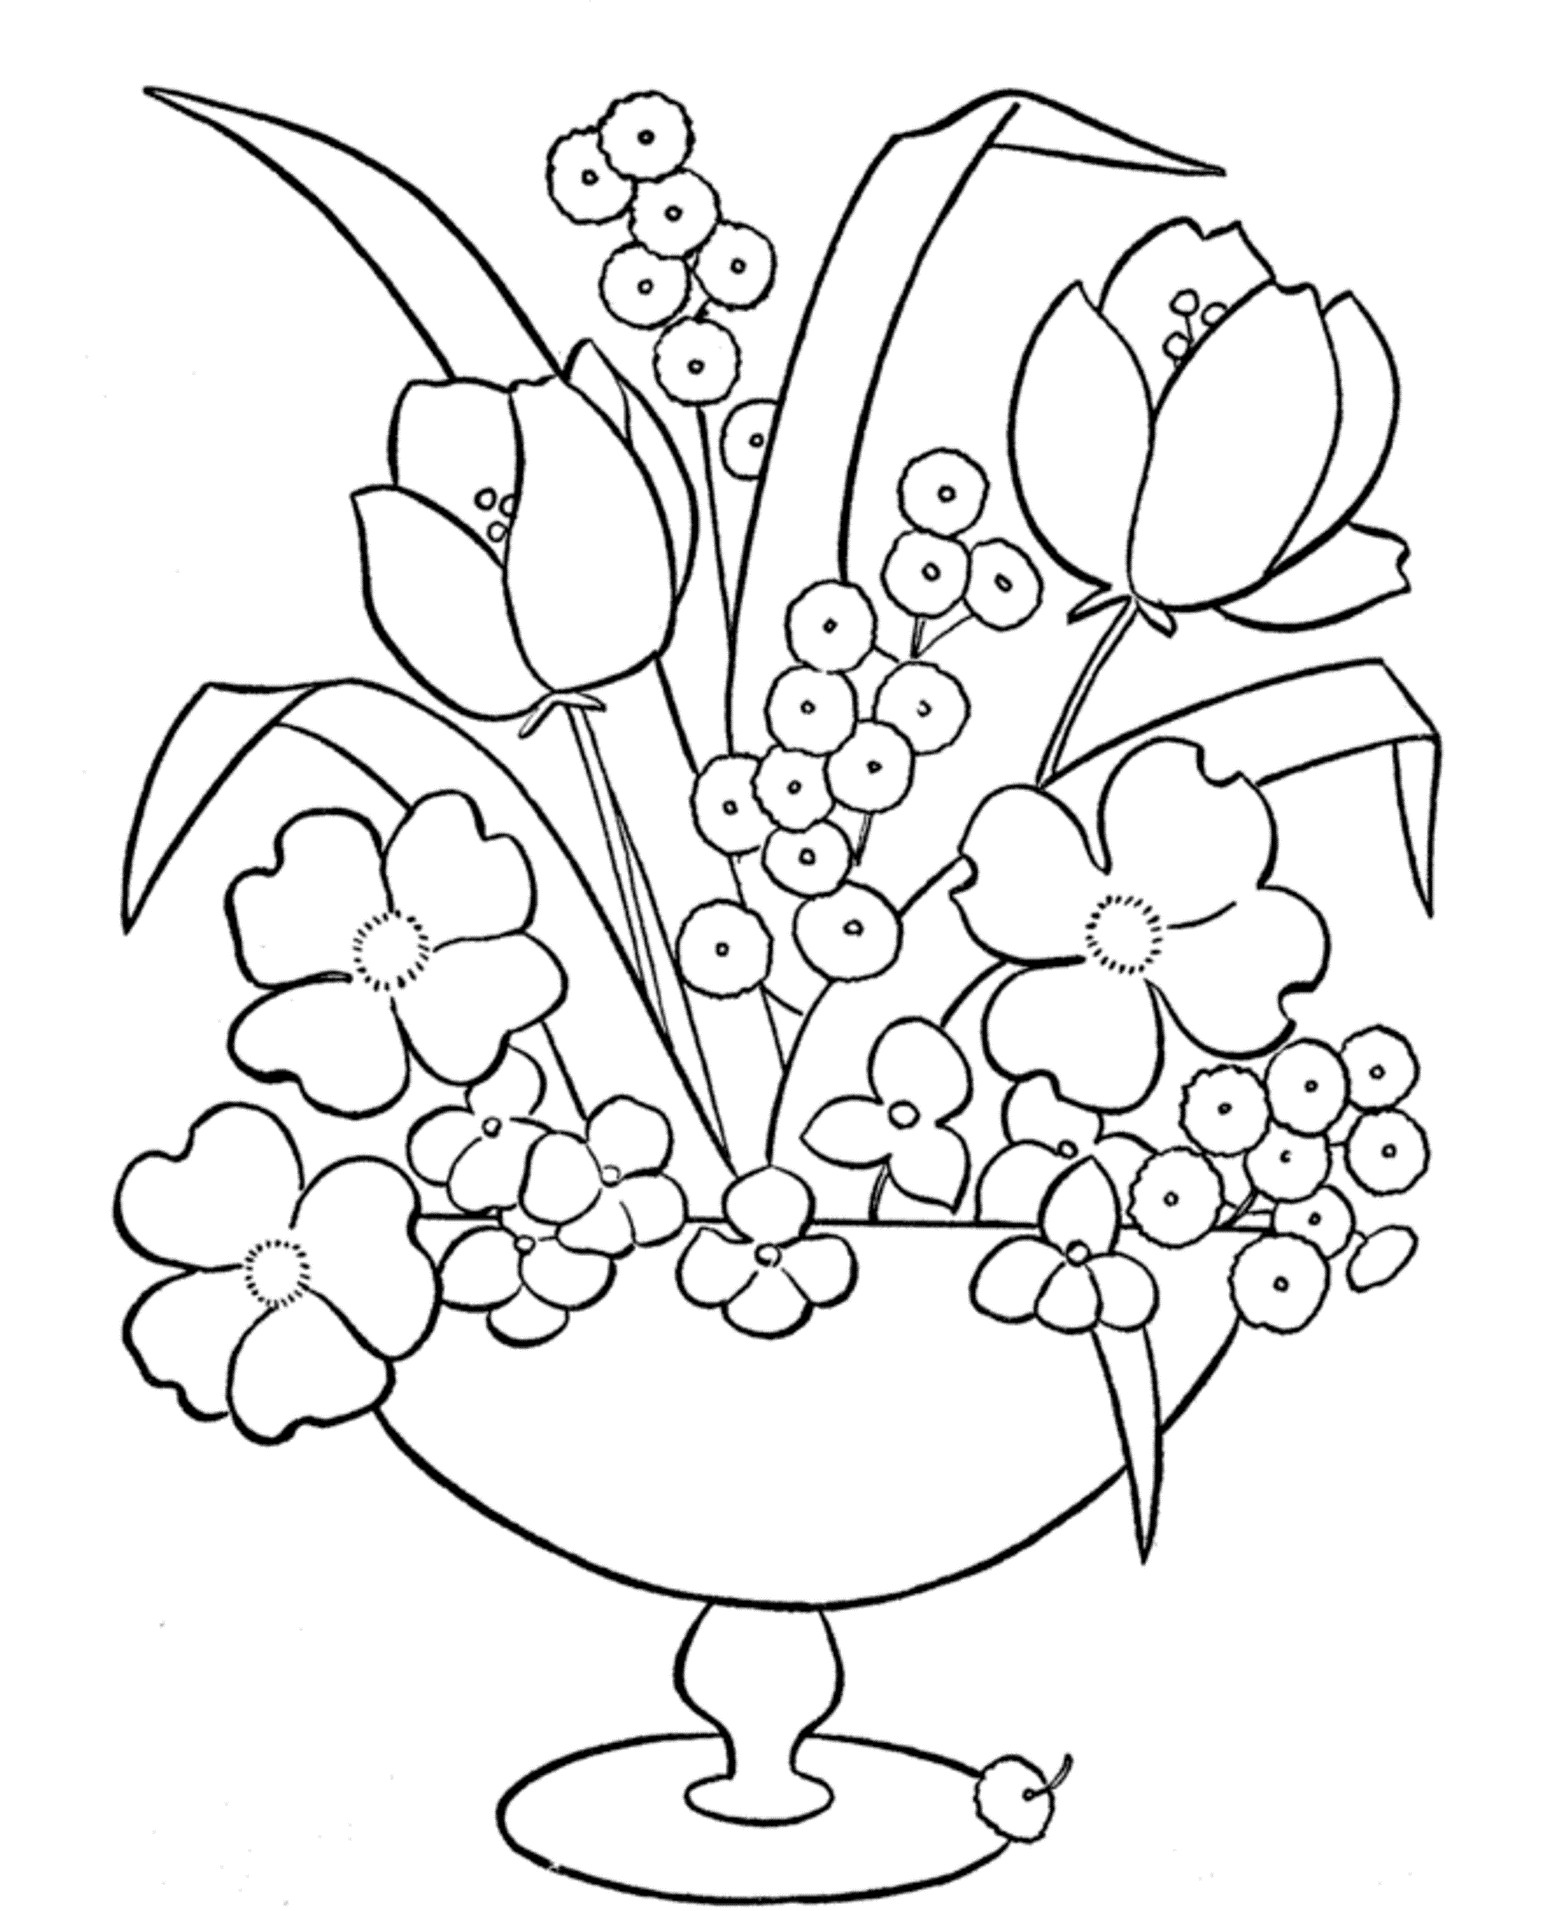 Beautiful Nature Coloring Pages Lovely Printable Coloring Pages Nature Jvzooreview